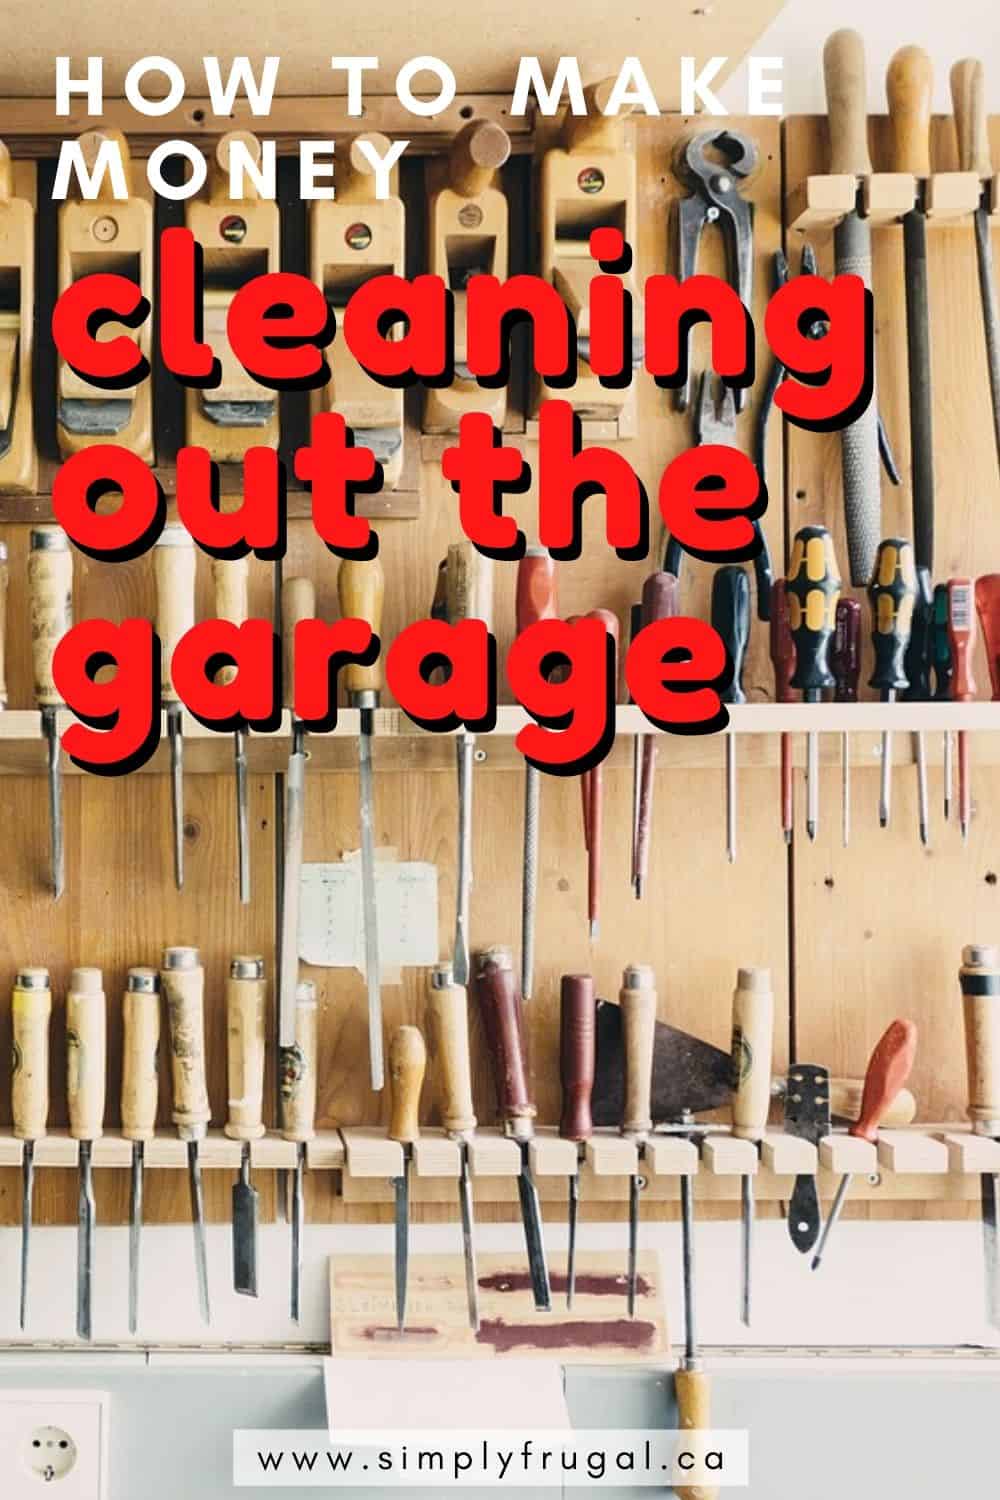 Is your garage stacked to the ceiling with stuff? If so, it might be time to give it a good cleaning. Cleaning out your garage can not only give you more space in your home, but can also net you some cash in your pocket! Take a look at these 5 ways to make money by cleaning out your garage.